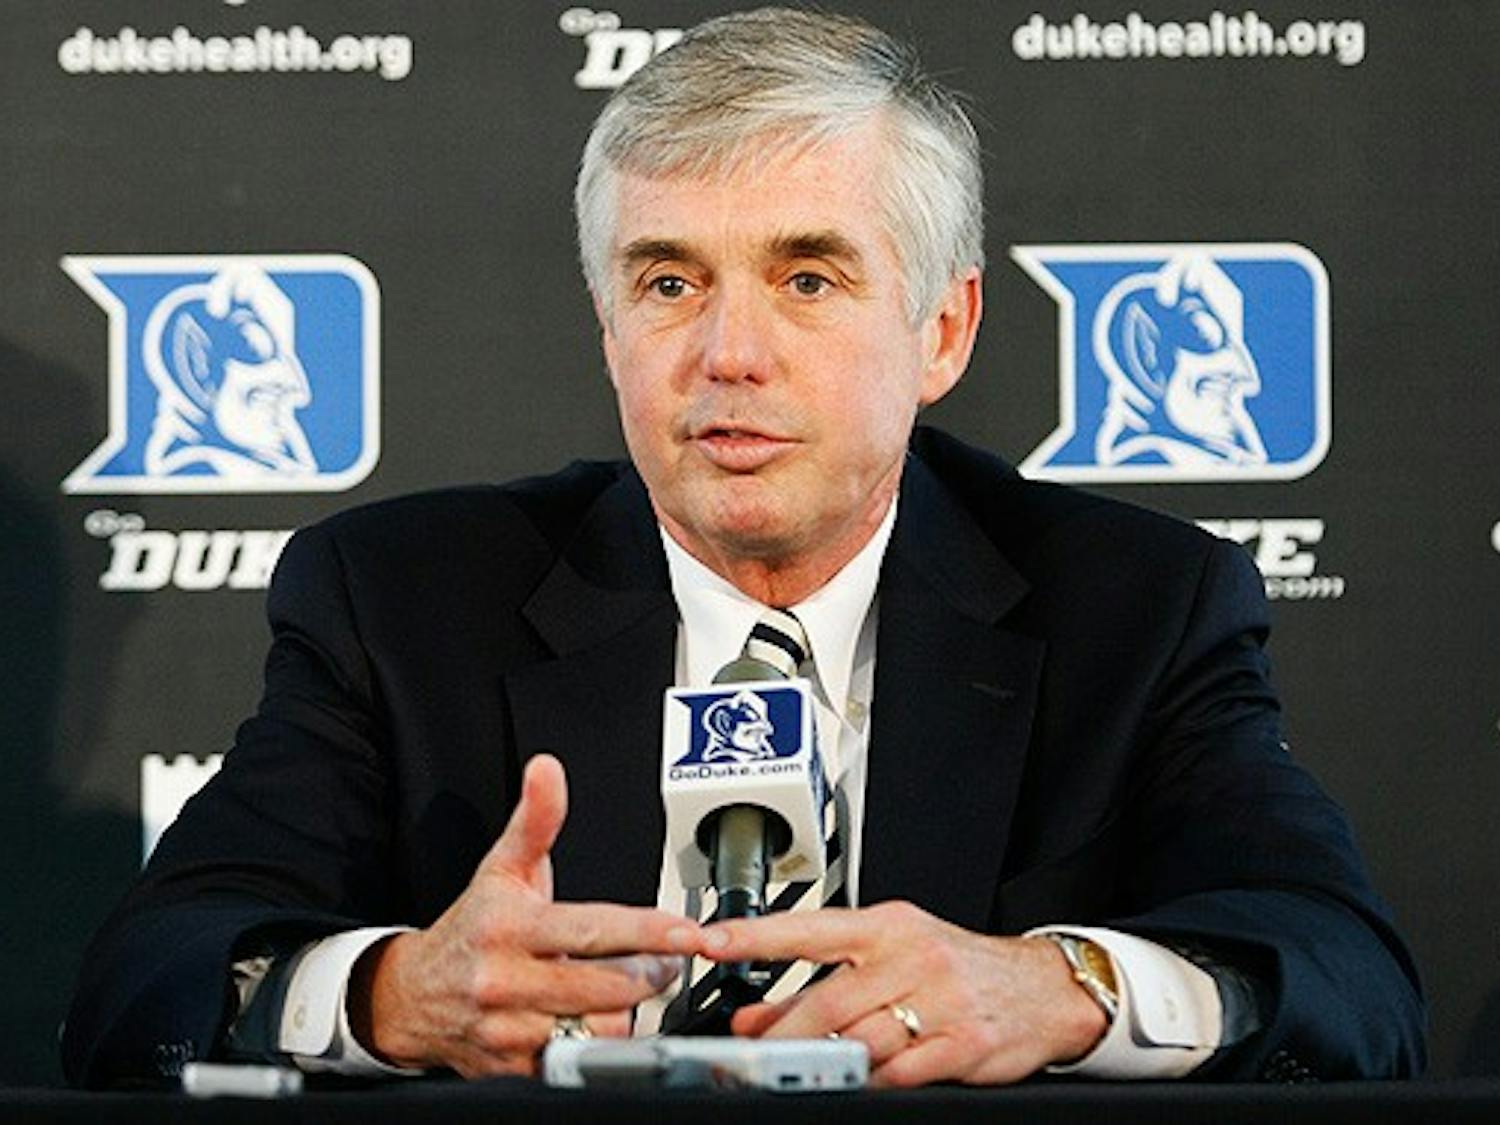 Director of Athletics Kevin White saw Duke win national championships in men’s lacrosse and men’s basketball.